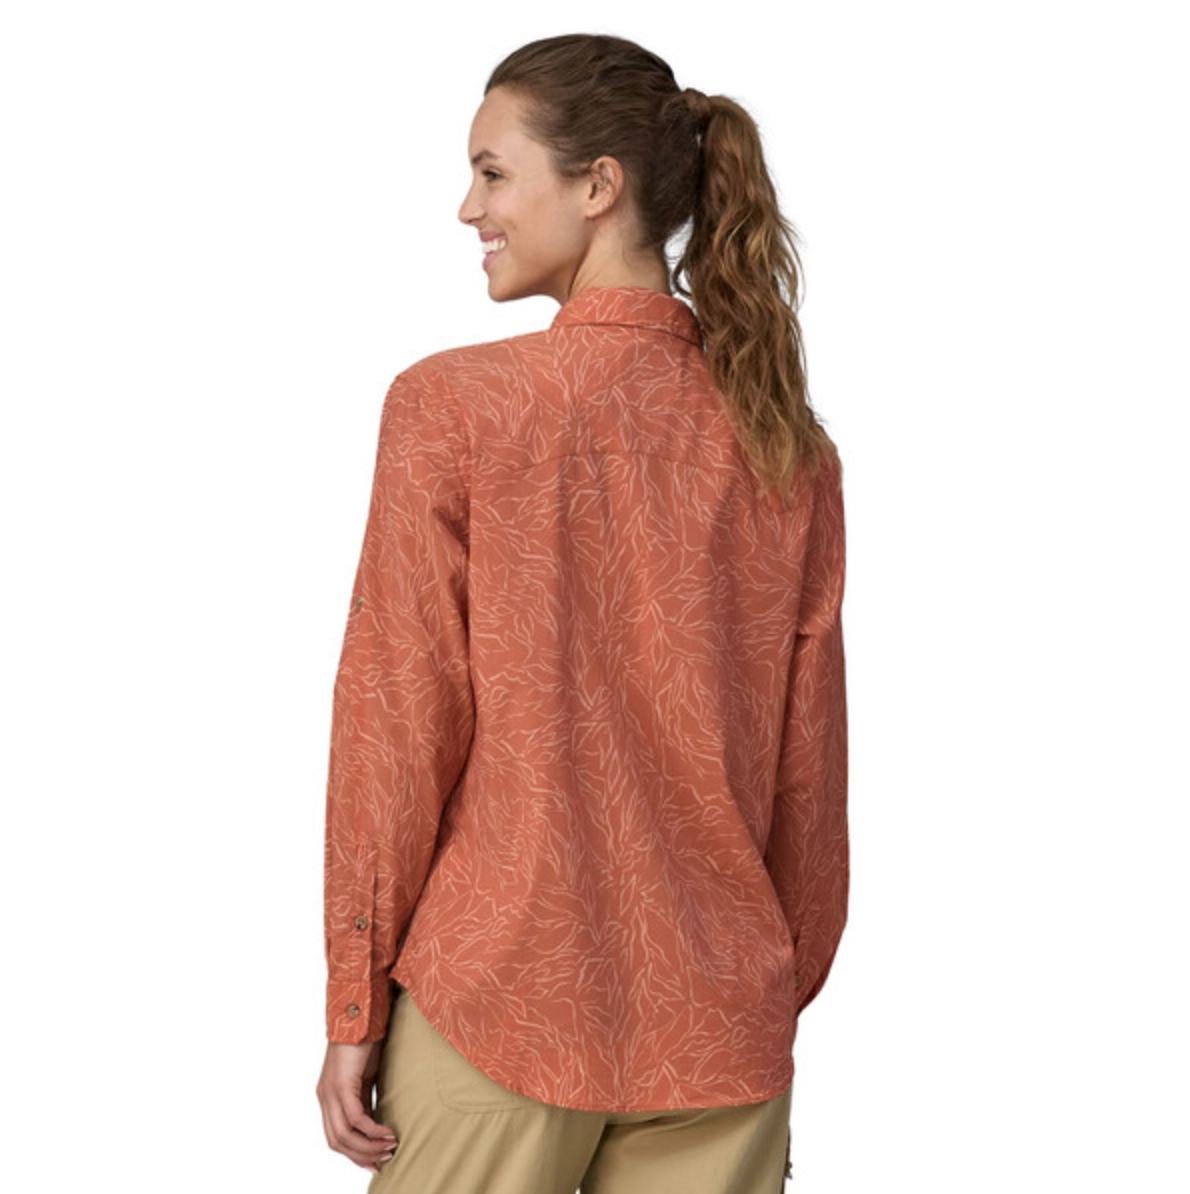 Patagonia Women's Long-Sleeved Sun Stretch Shirt - Over Under Water: Sienna Clay